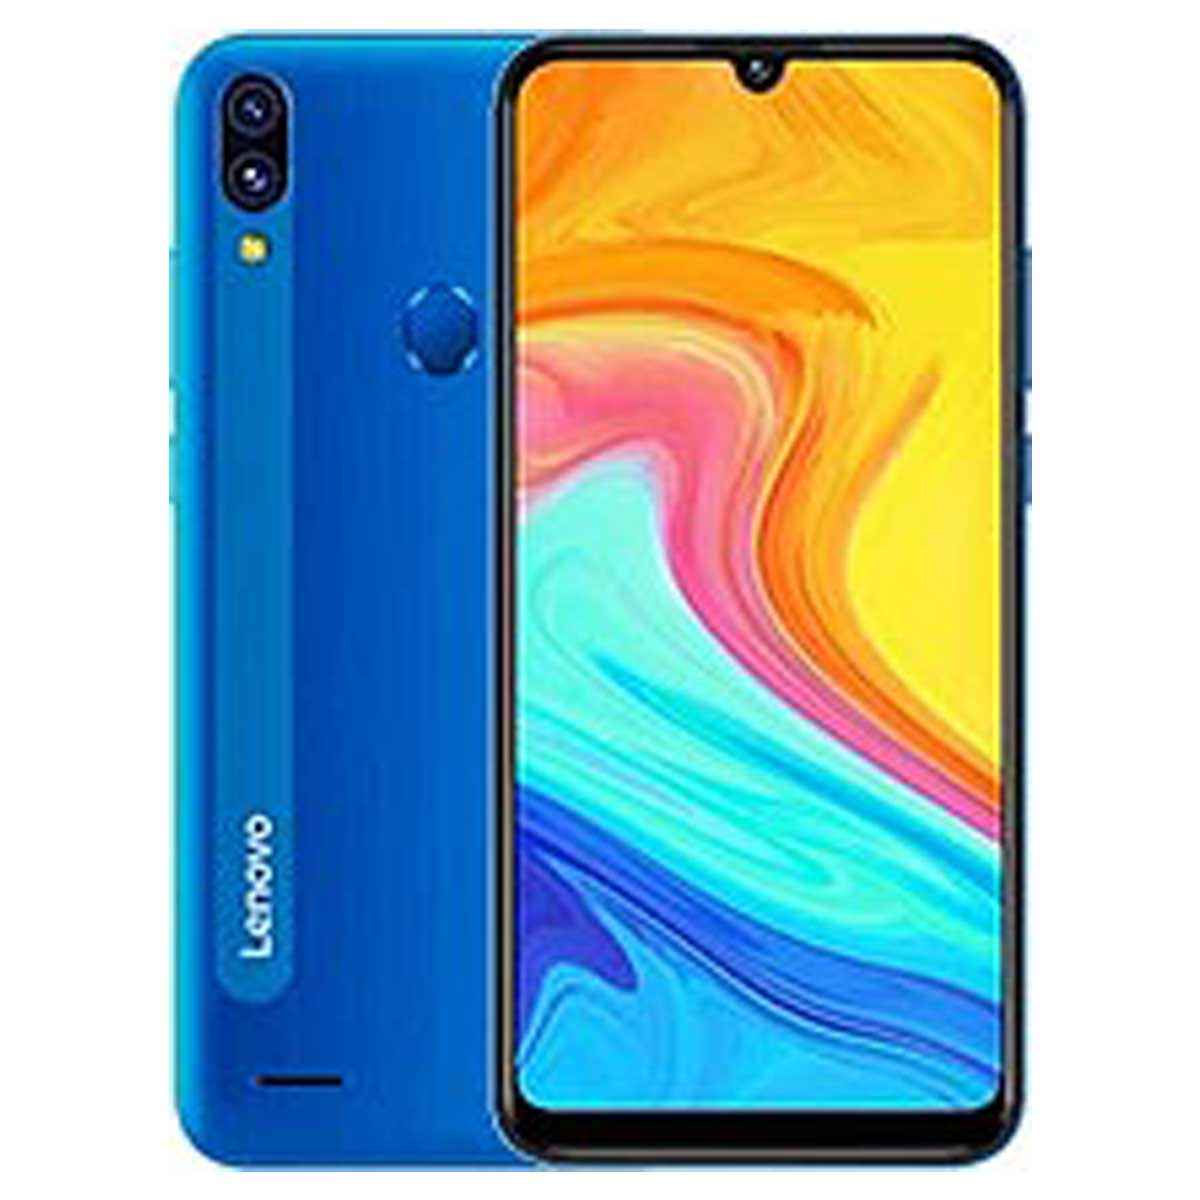 Lenovo A7 Price in India, Full & Features 6th February 2022 | Digit